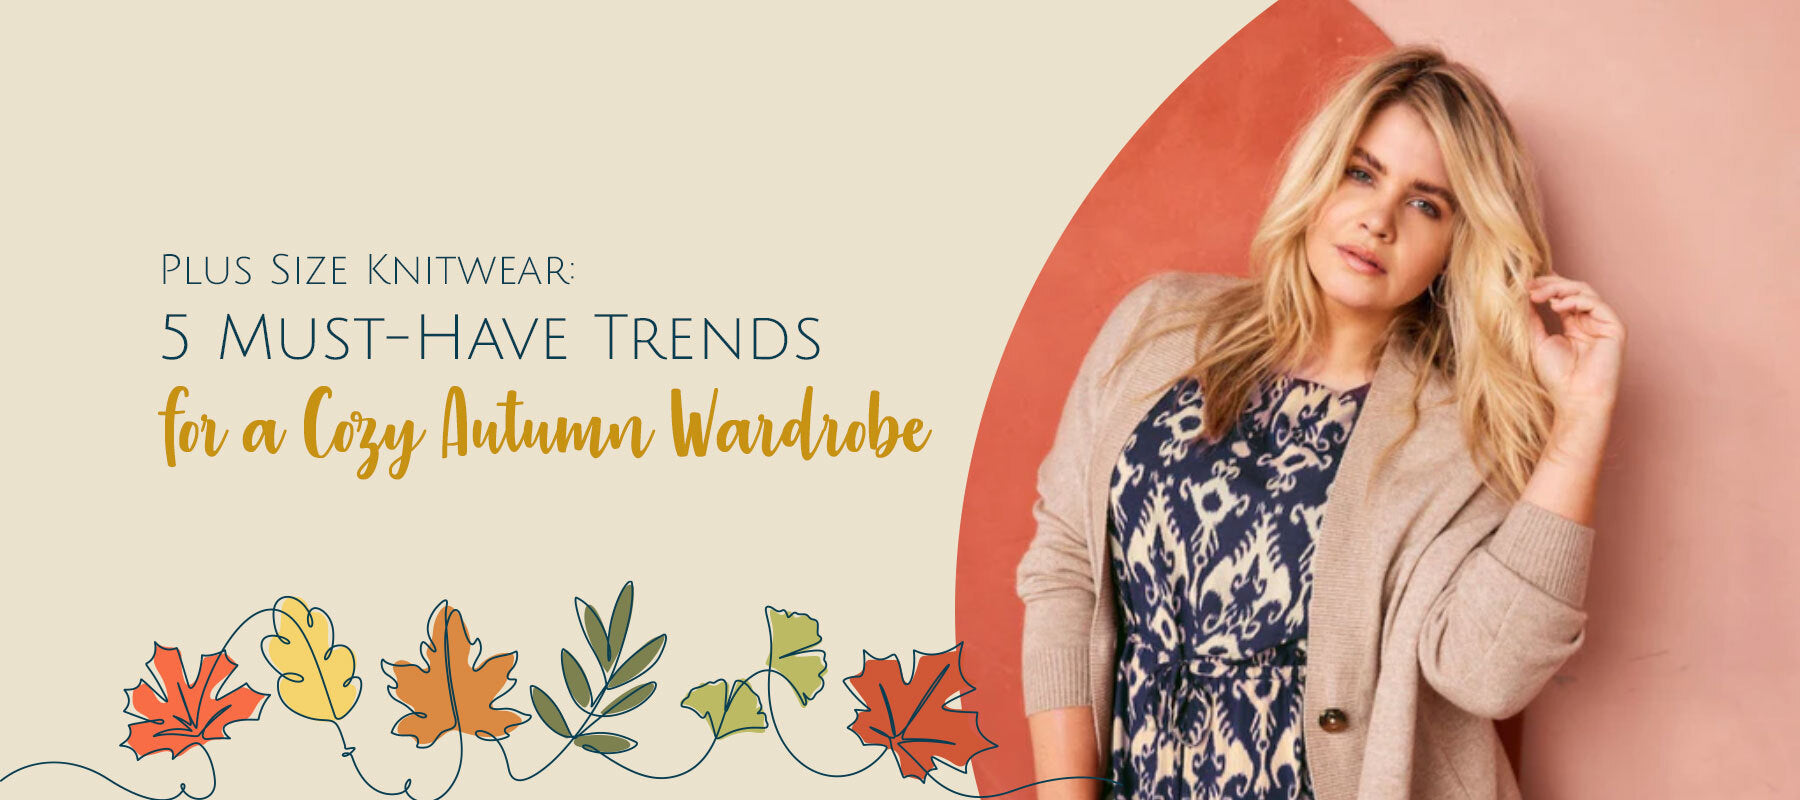 Plus Size Knitwear: 5 Must-Have Trends for a Cozy Autumn Wardrobe